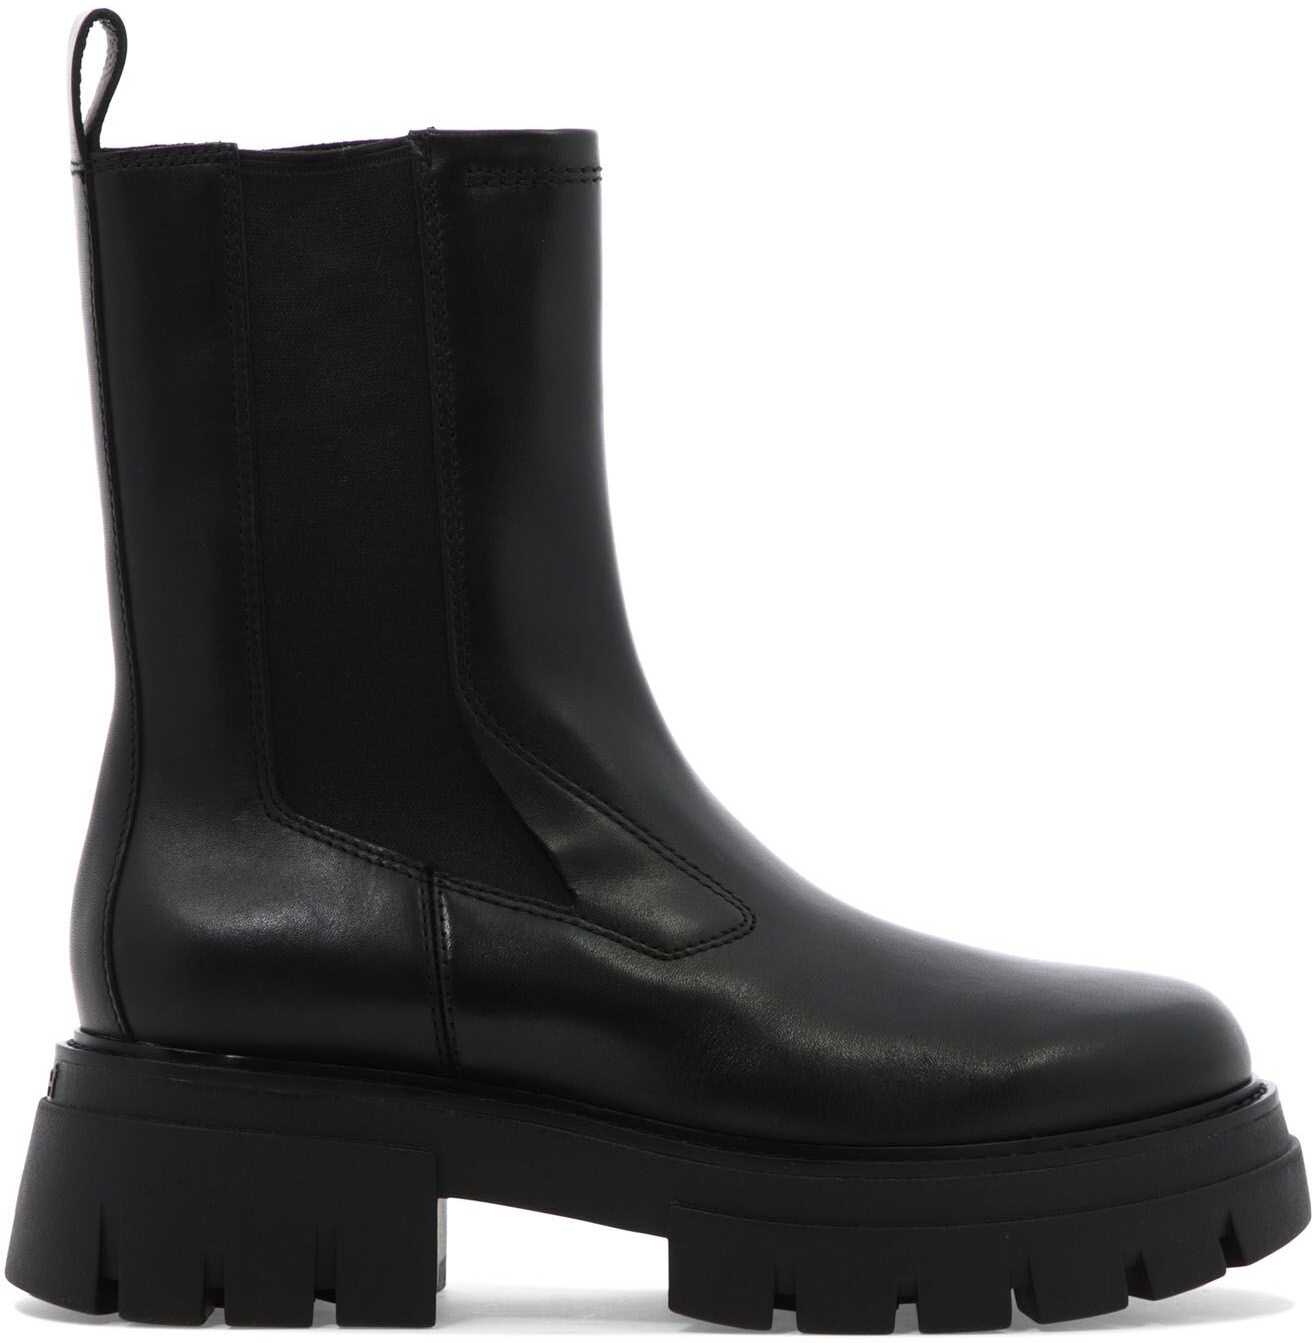 ASH Other Materials Ankle Boots BLACK image1